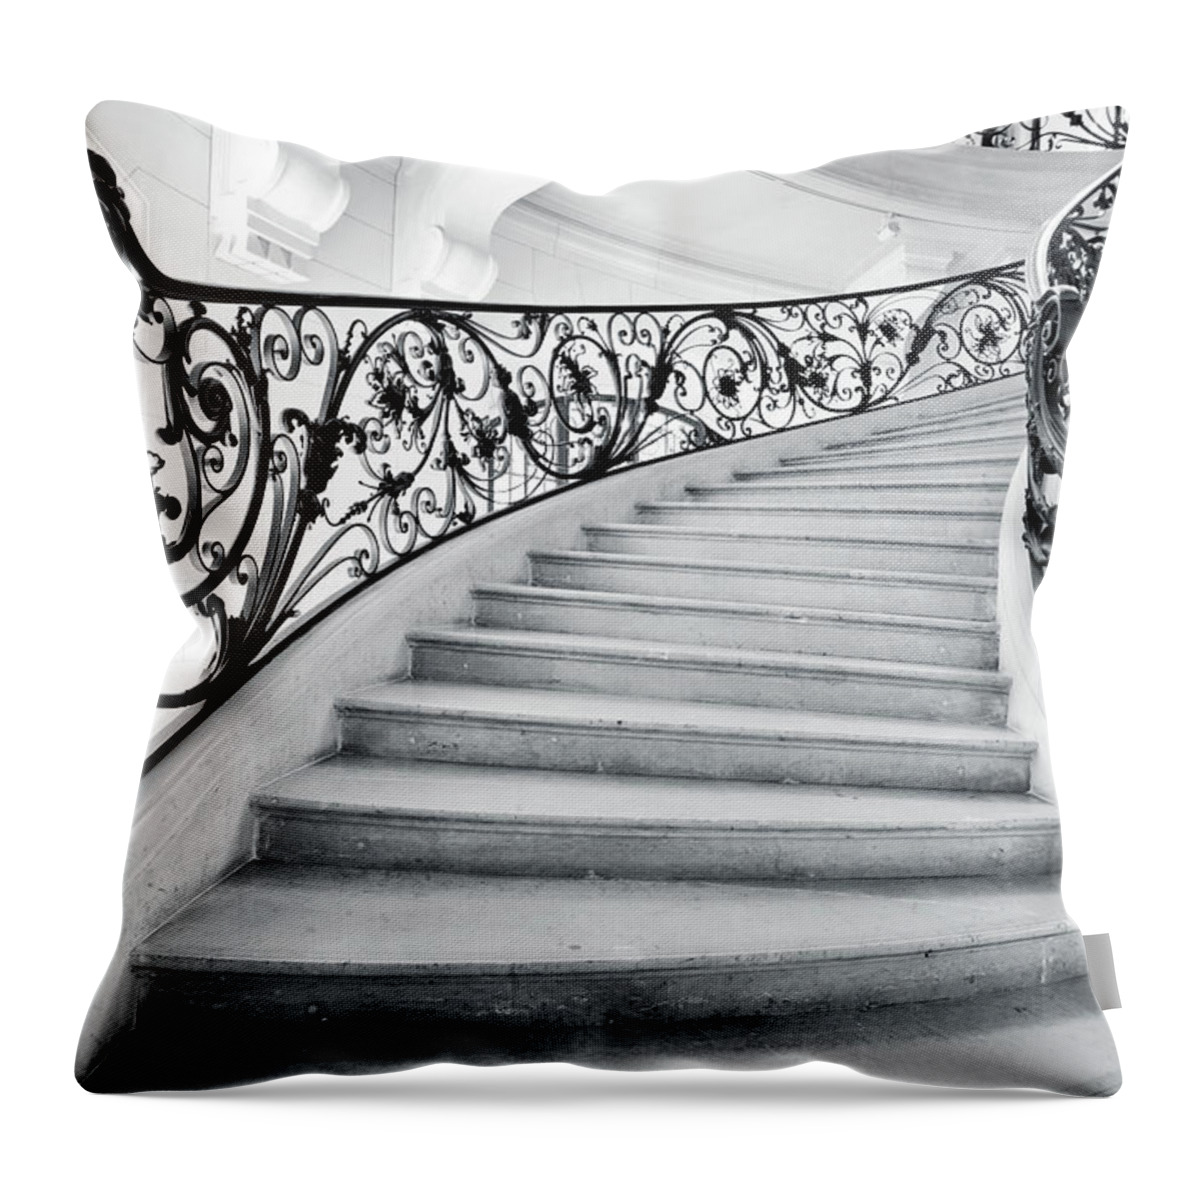 Steps Throw Pillow featuring the photograph Staircase In Paris #1 by Nikada